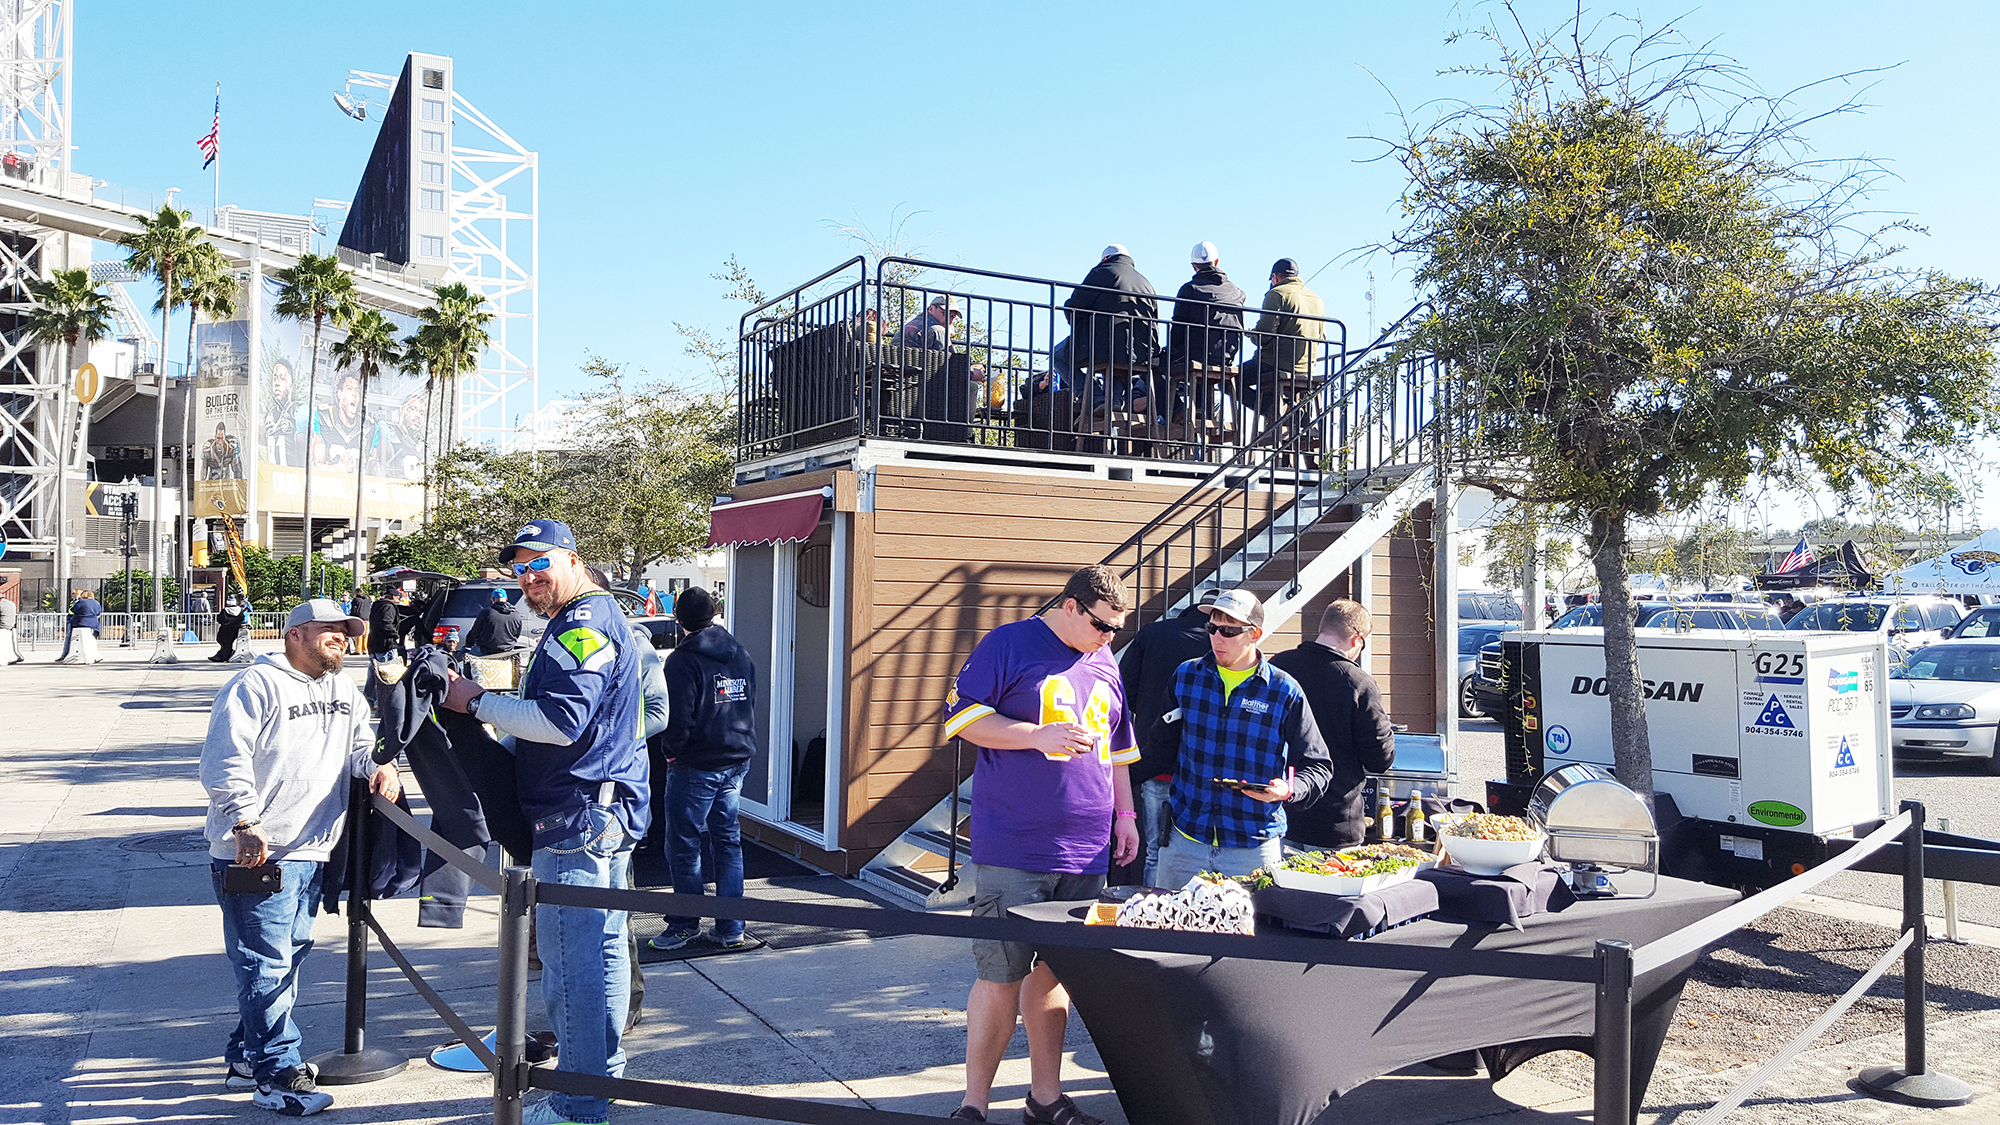 Fans tailgate outside EverBank Field using Party Suite’s portable Entertainment Suite. The unit is 16 feet long and 8 feet wide.